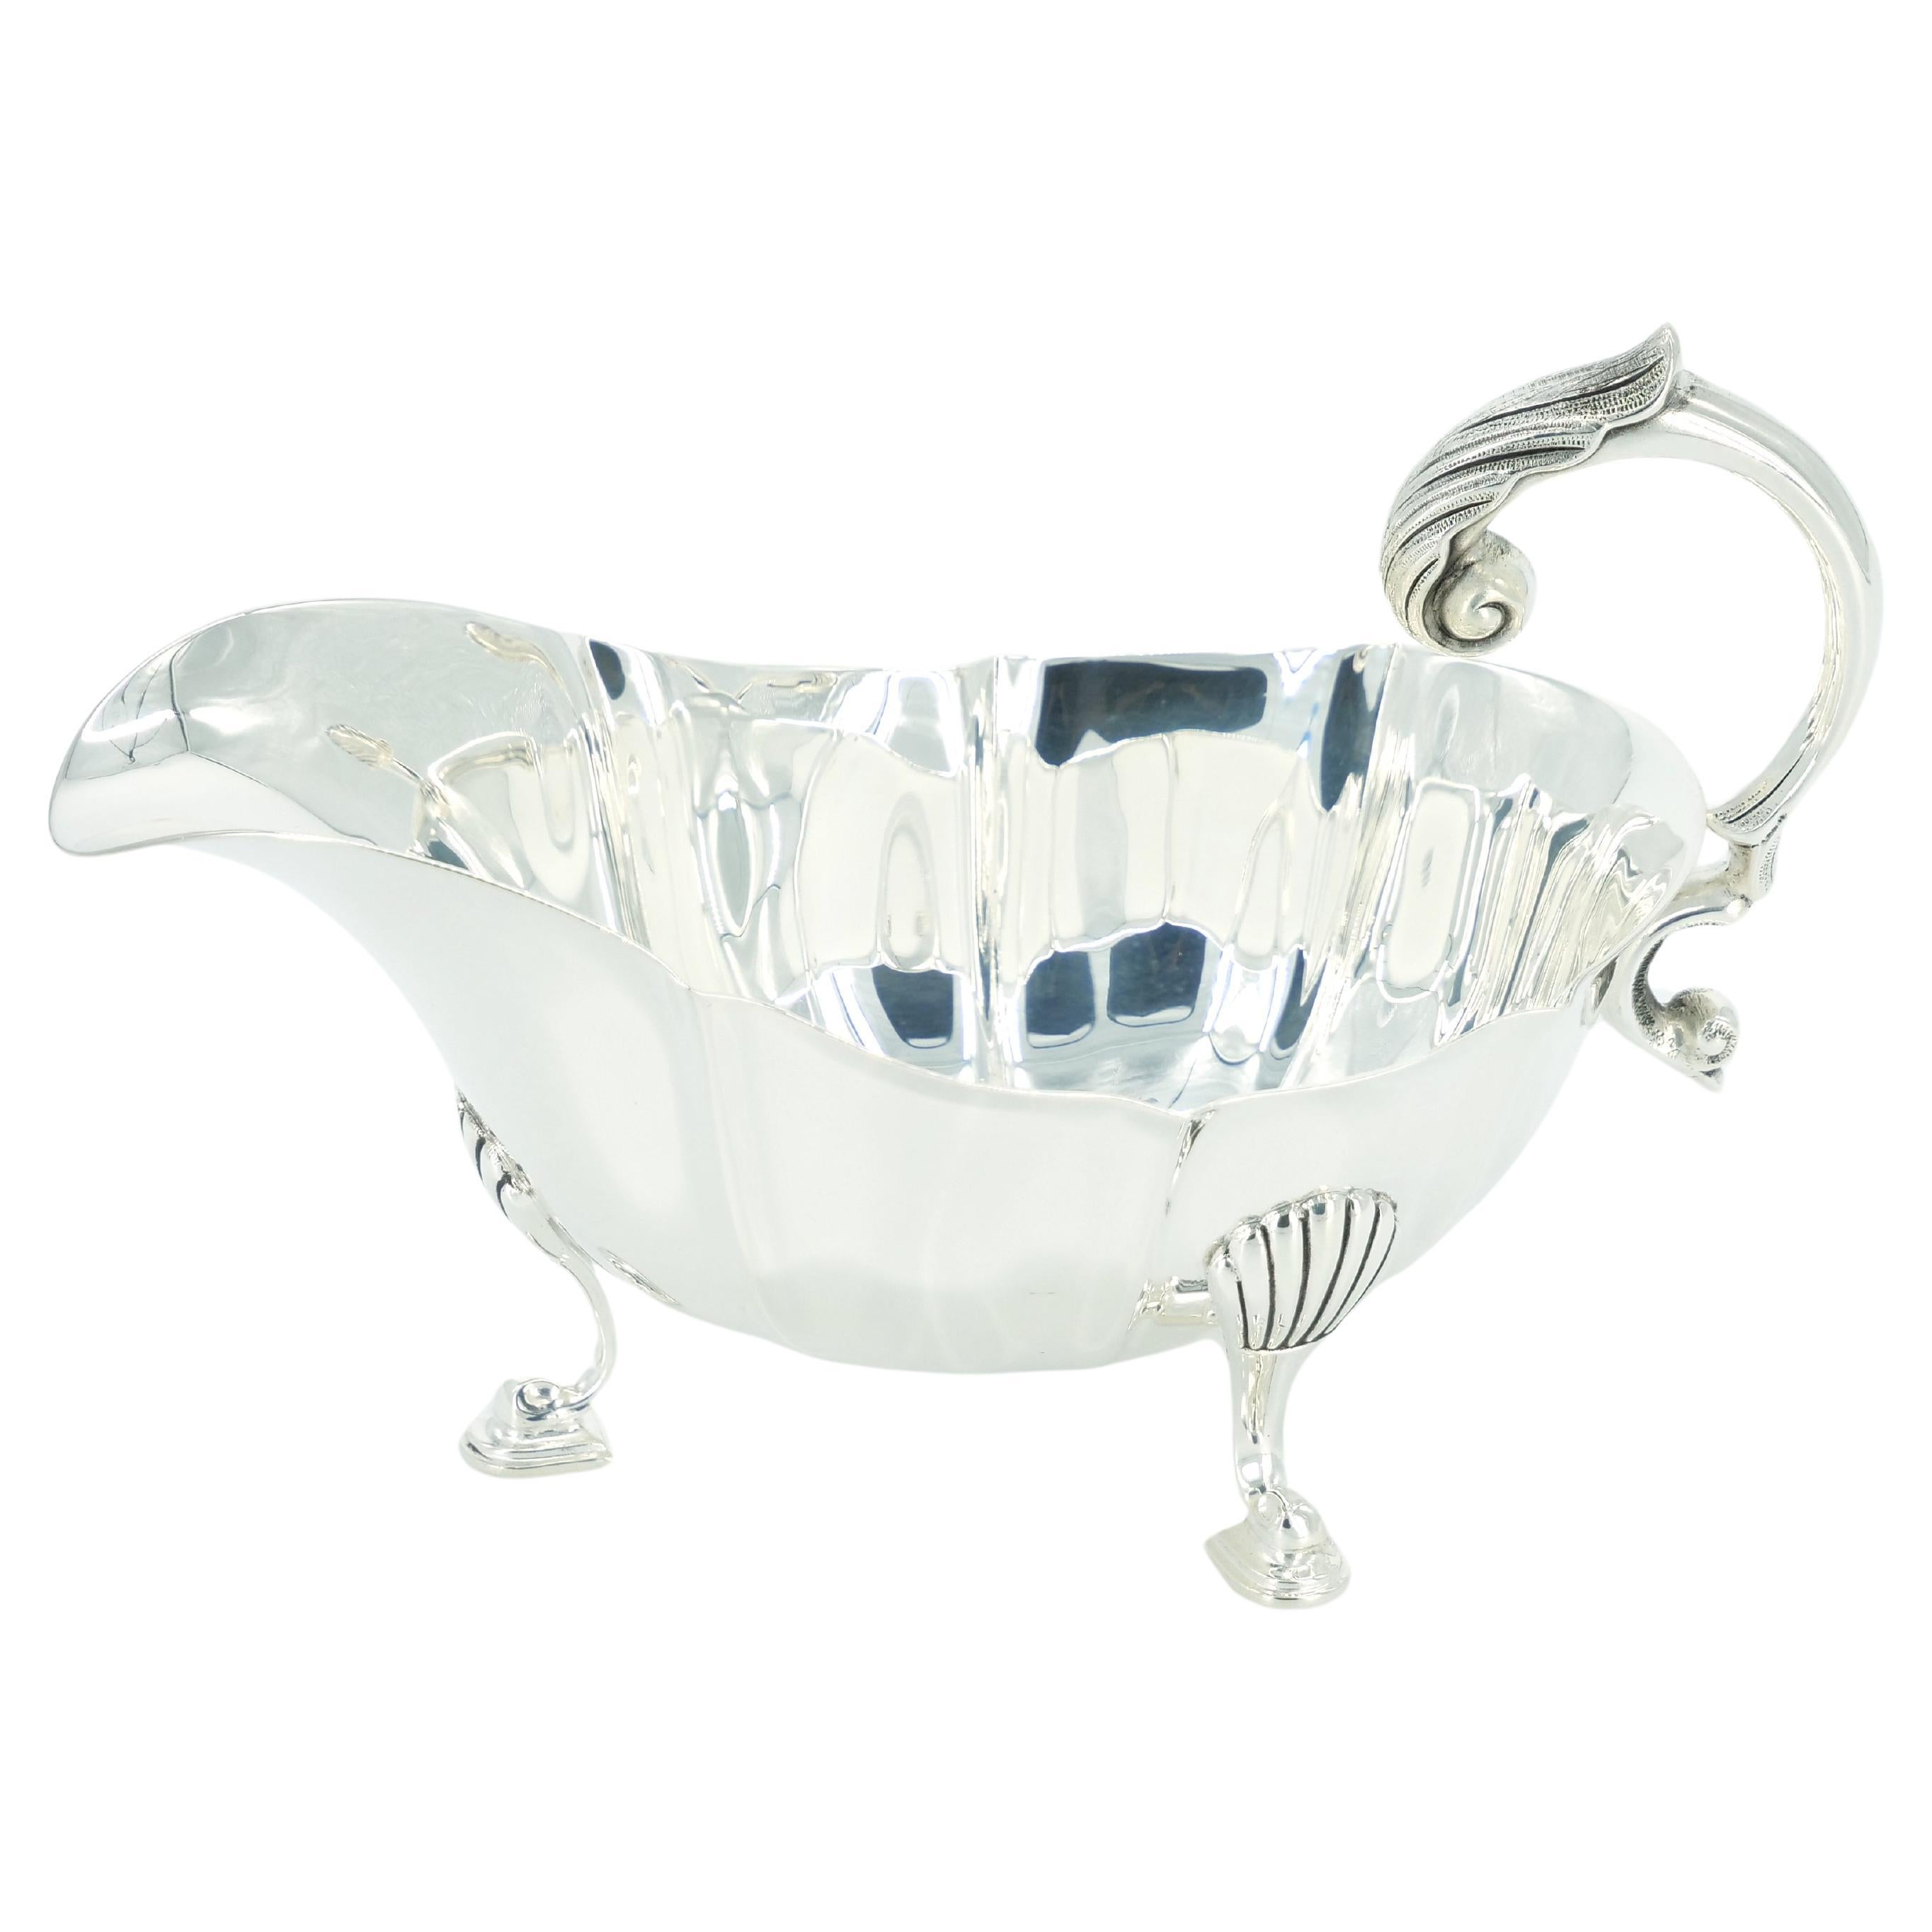 Italian Silver Plated Tableware Footed Serving Piece For Sale